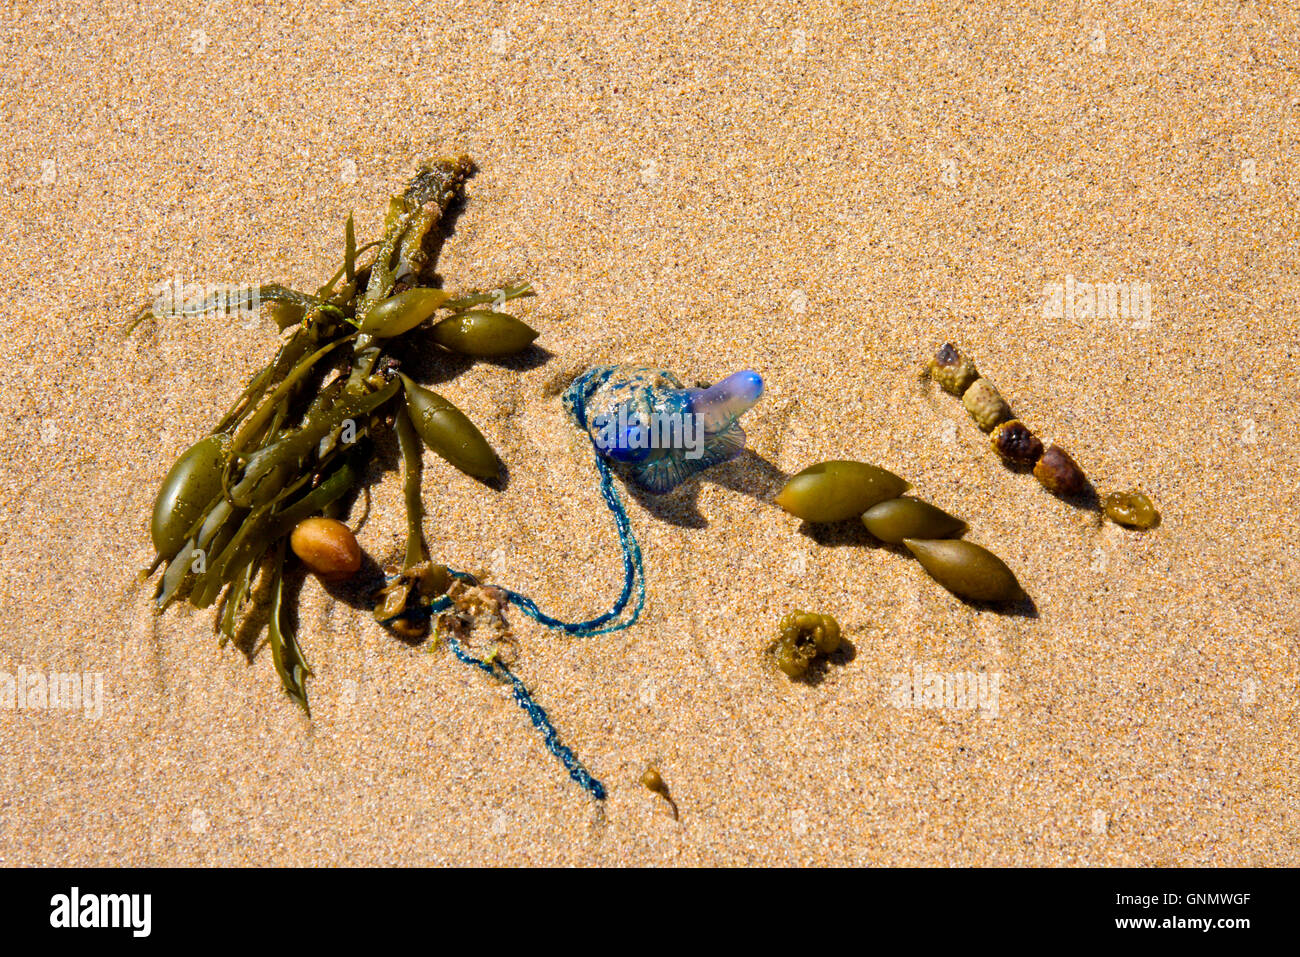 Deadly Blue Bottle Jellyfish washed up on Australian beach Stock Photo